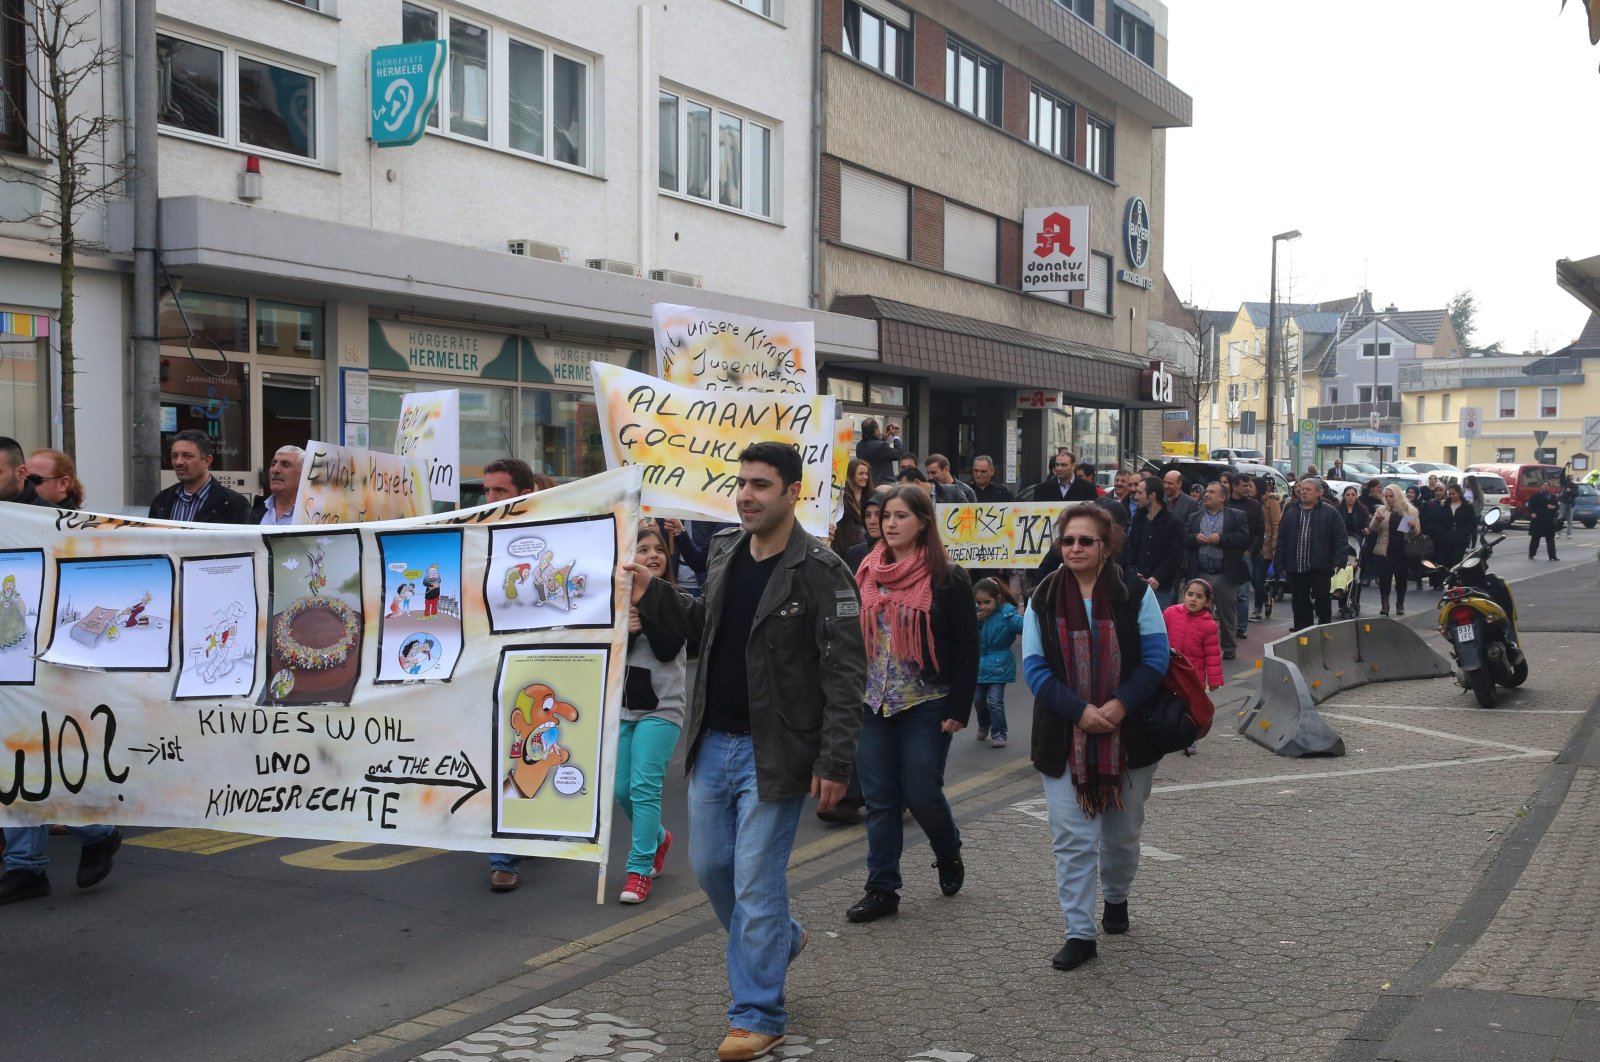 Turkish families protest the Jugendamt over the "forced" placement of two children, in Bornheim, Germany, March 9, 2014. (AA PHOTO)